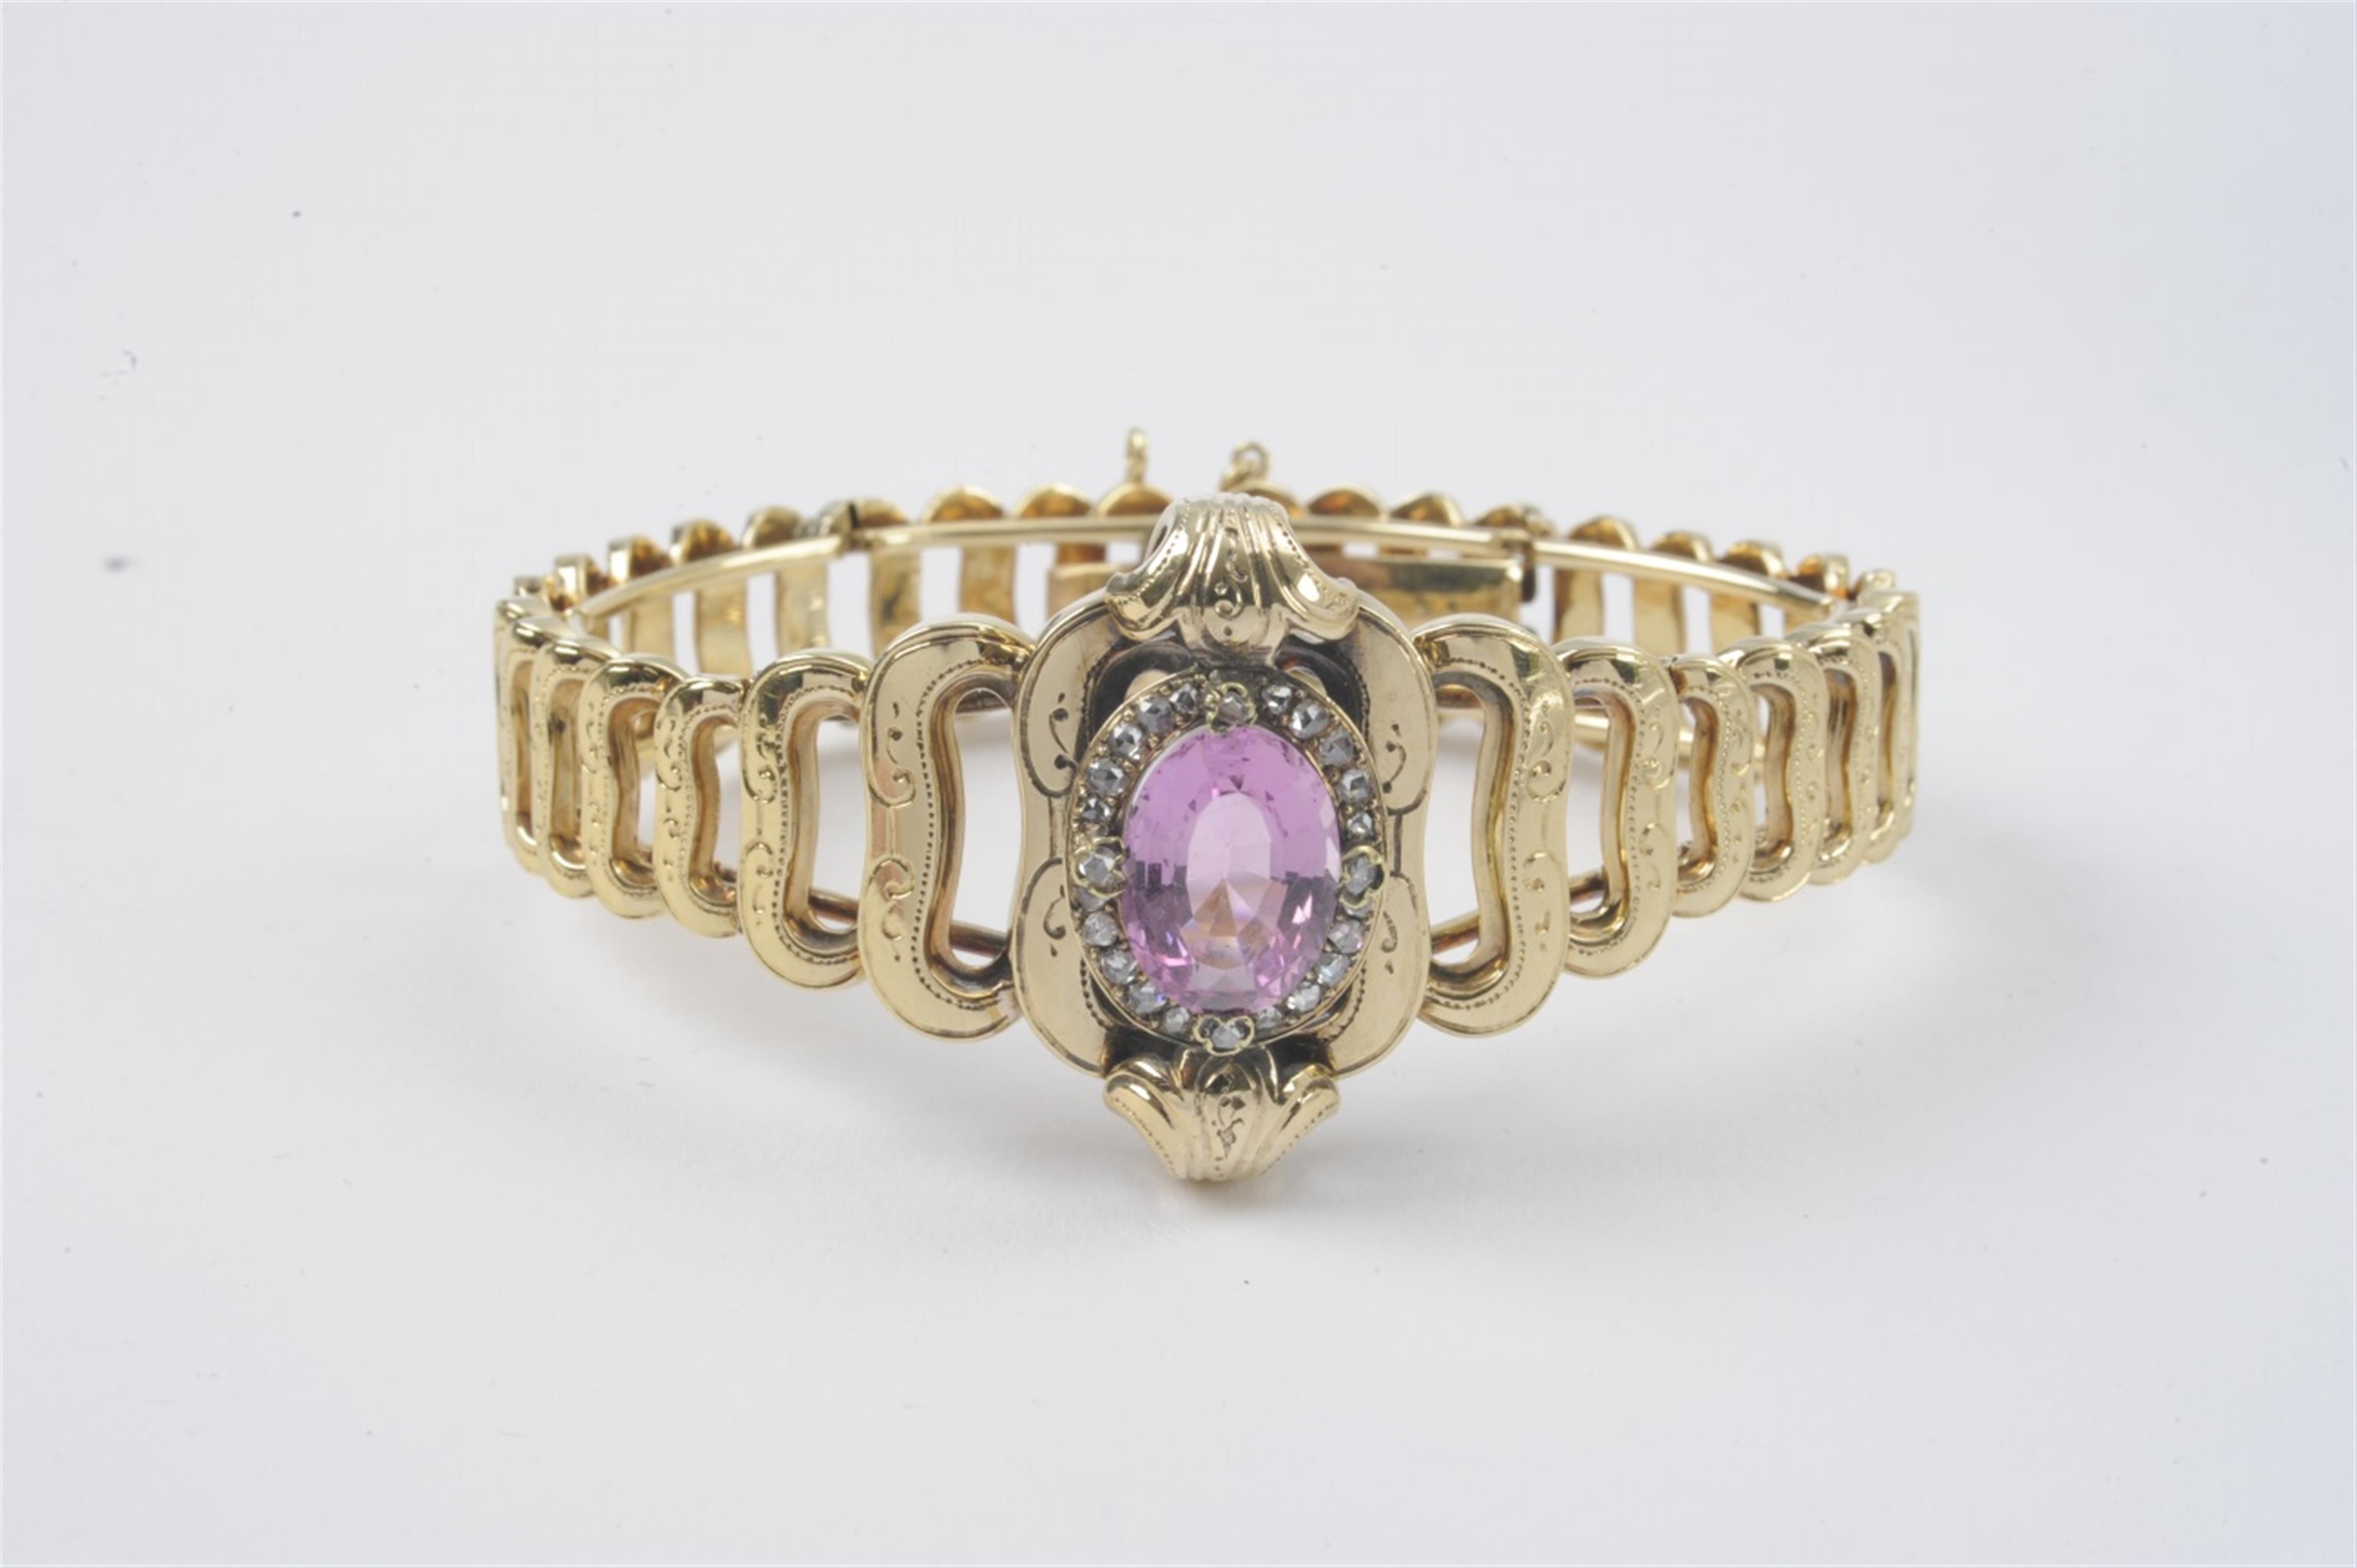 A French 18k red gold bracelet with a pink topaz - image-1